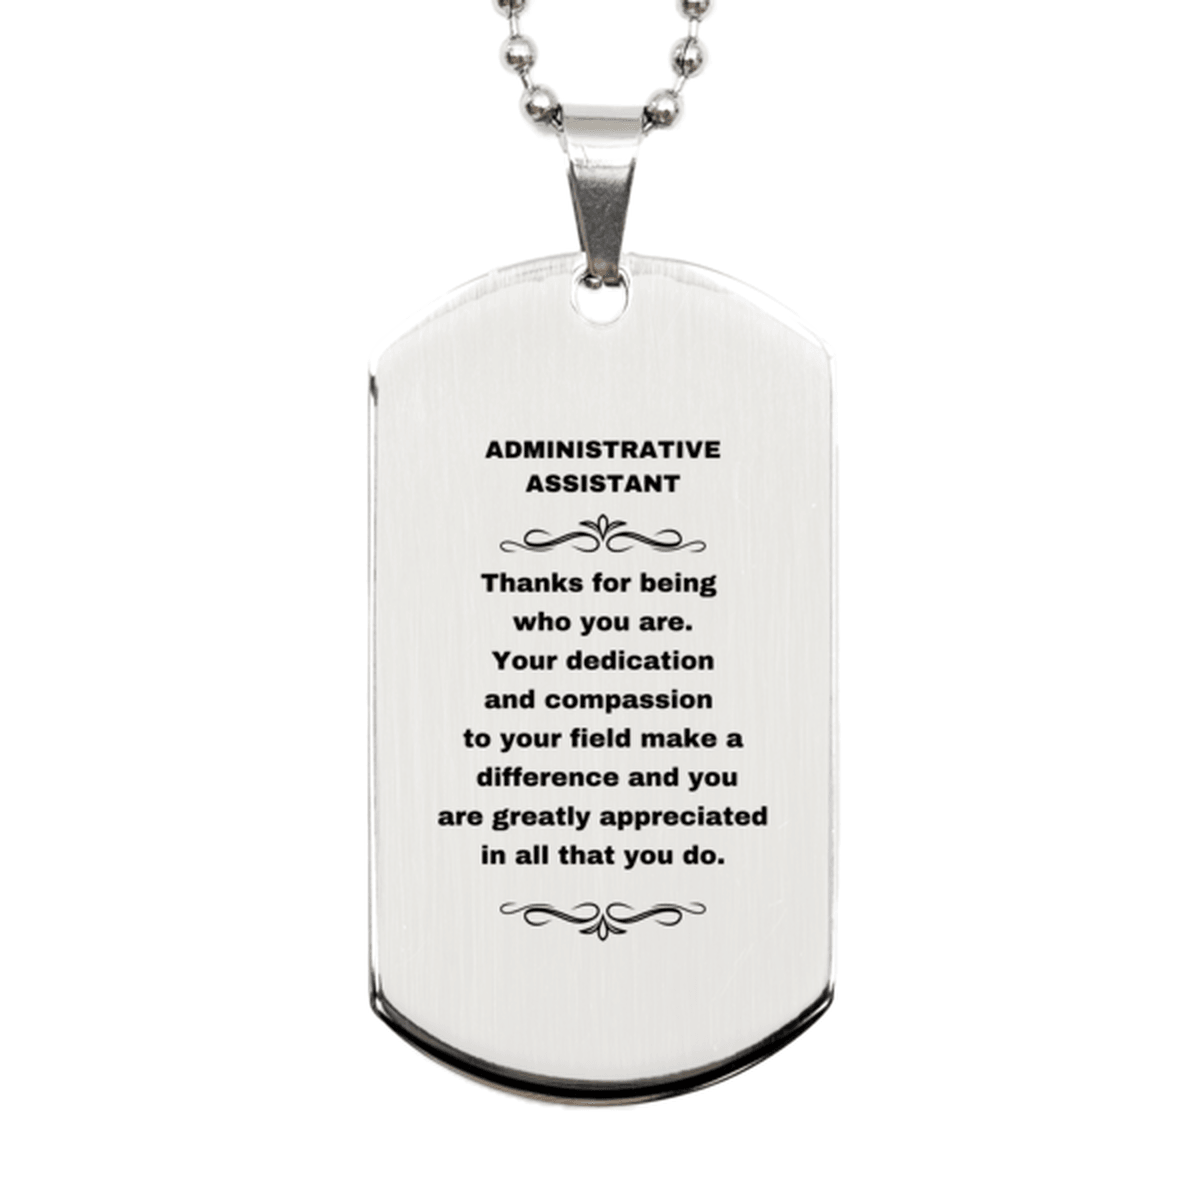 Administrative Assistant Silver Dog Tag Engraved Necklace - Thanks for being who you are - Birthday Christmas Jewelry Gifts Coworkers Colleague Boss - Mallard Moon Gift Shop